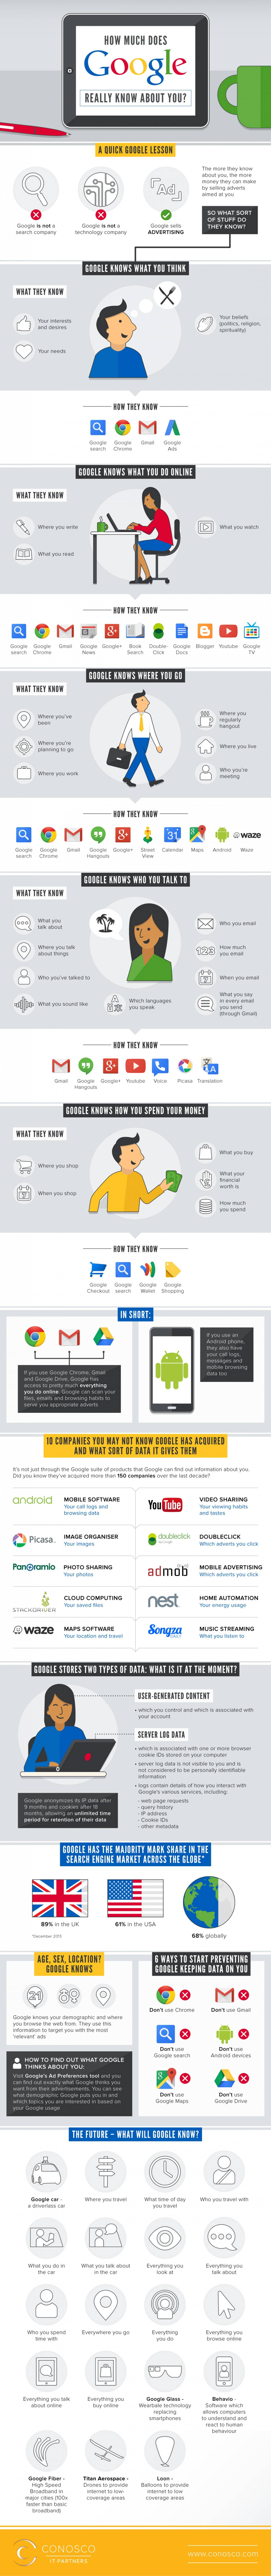 How much does Google know about You?